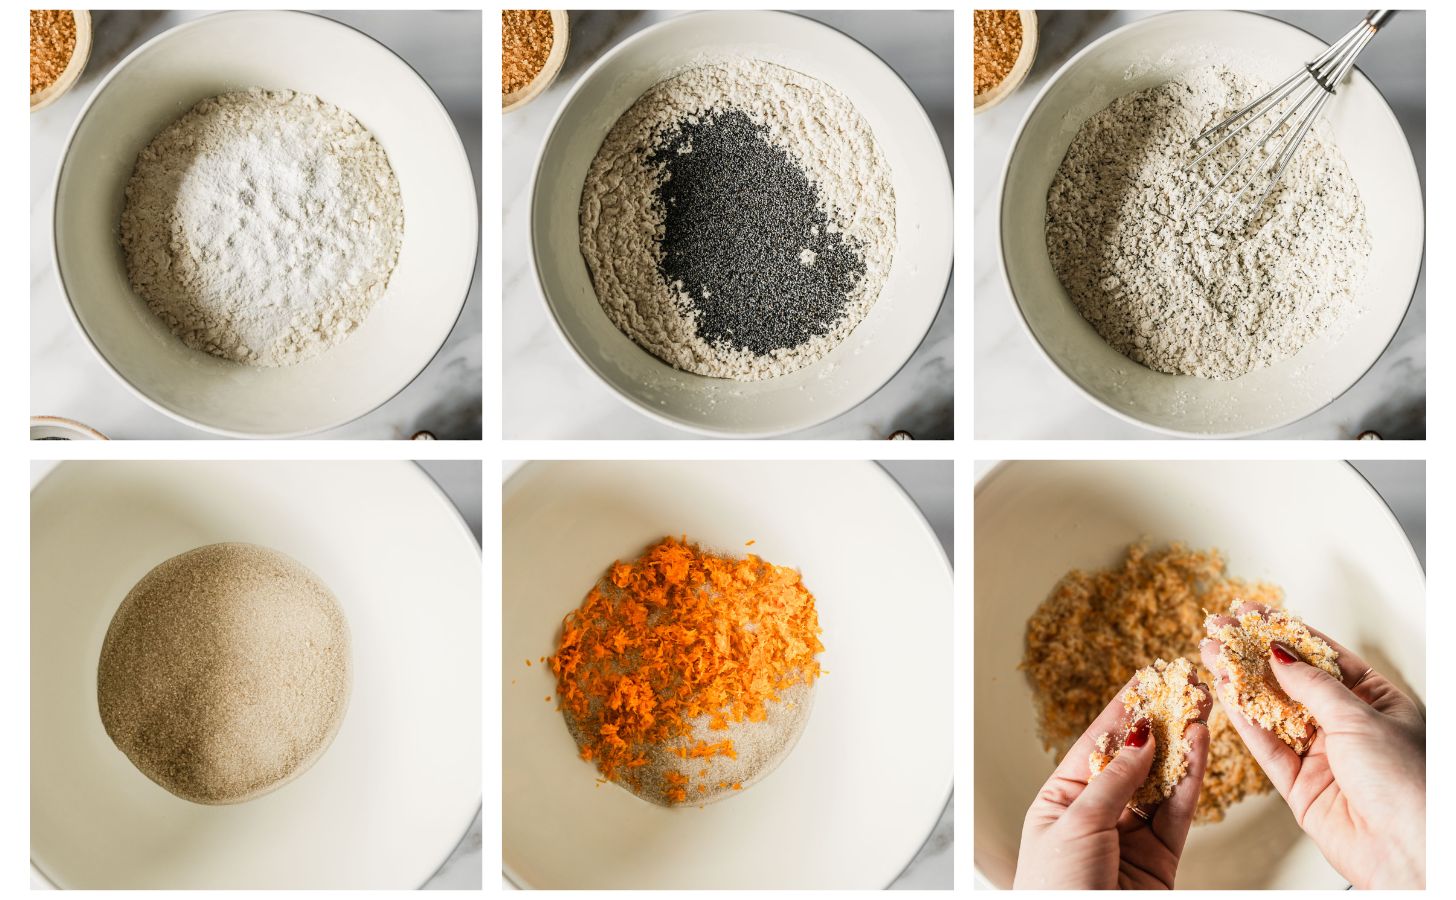 Six steps to making quick bread. In photo 1, a white bowl of flour on a white counter. In photo 2, the bowl has black seeds in it. In photo 3, a whisk is whisking the mixture together. In photo 4, a white bowl of sugar. In photo 5, the sugar is topped with citrus zest. In photo 6, hands are rubbing the sugar and zest together.